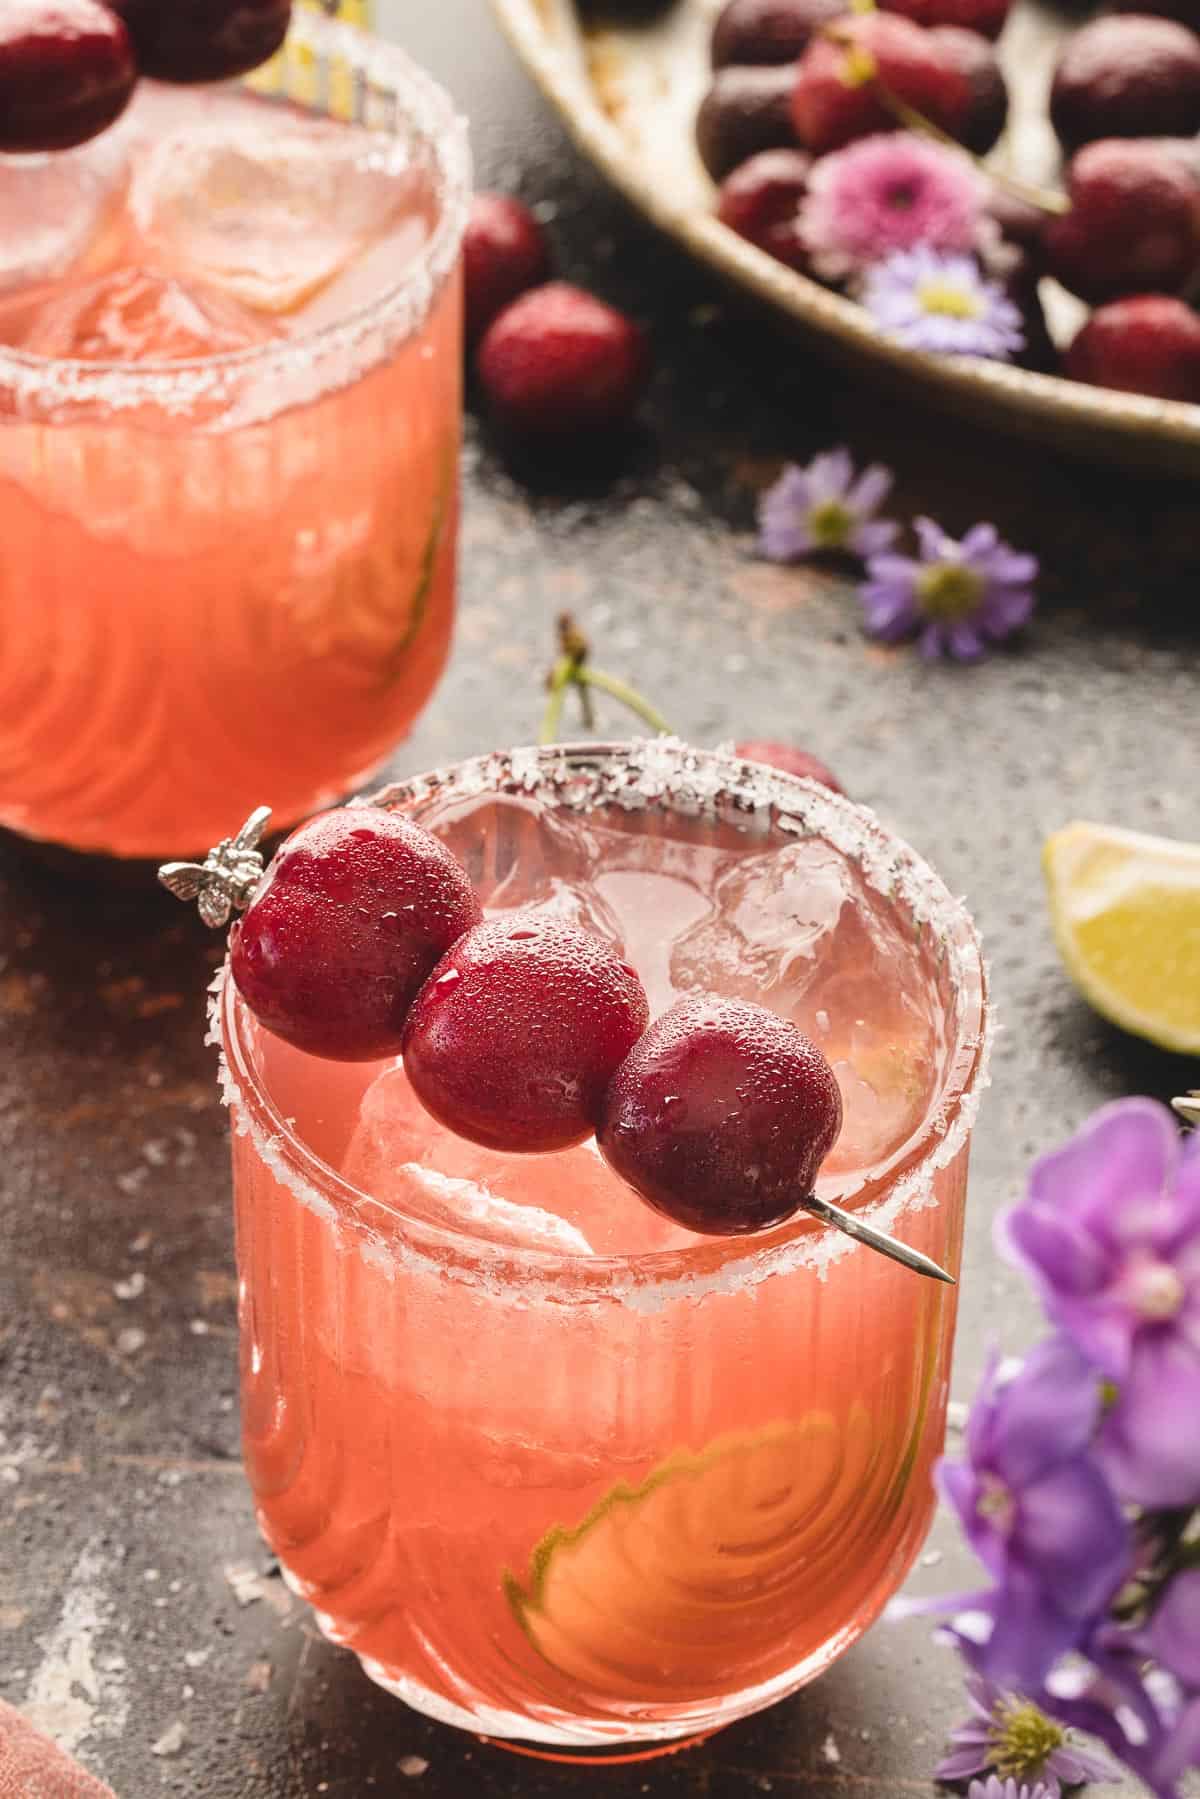 Front view of two cherry margaritas garnished with fresh cherries.